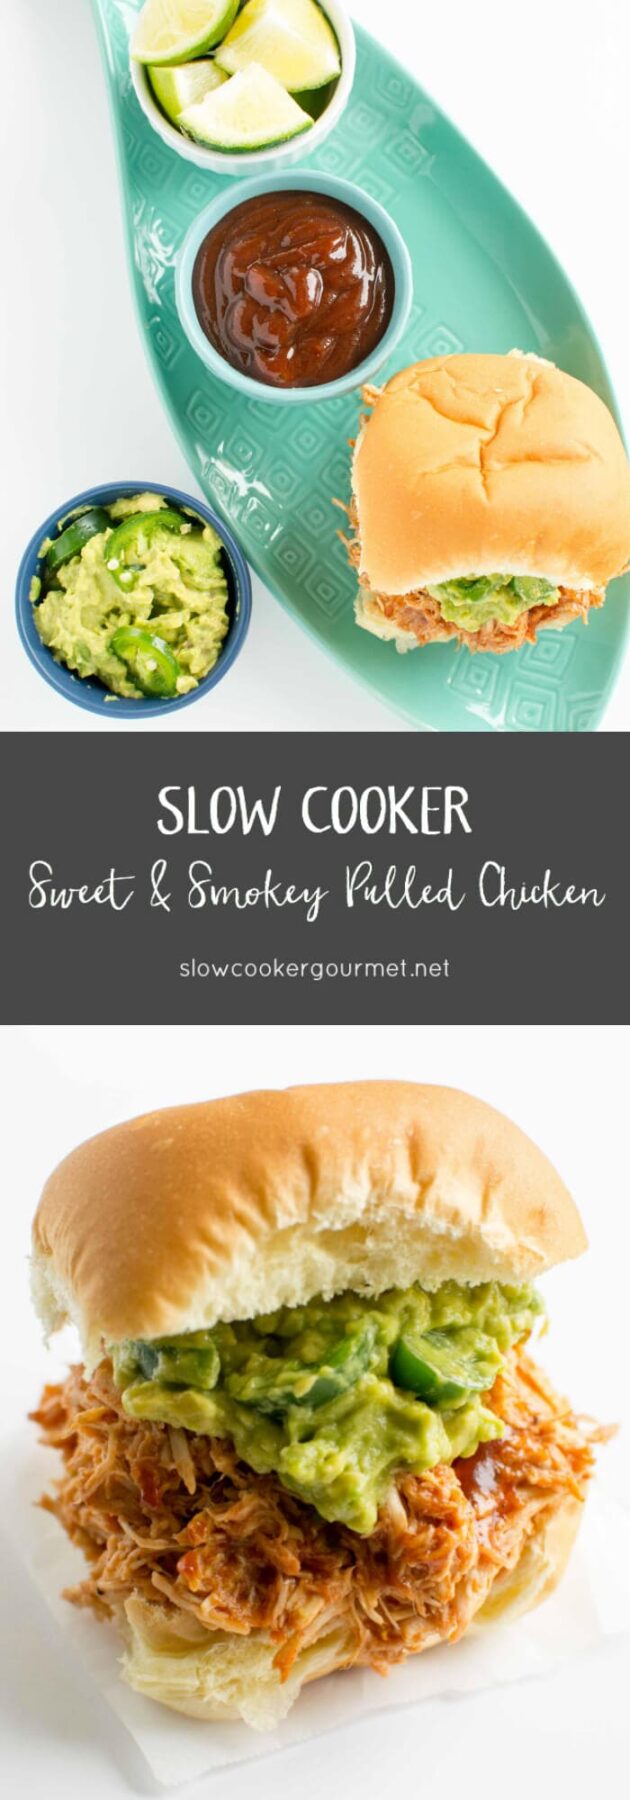 Slow Cooker Sweet & Smoky Pulled Chicken